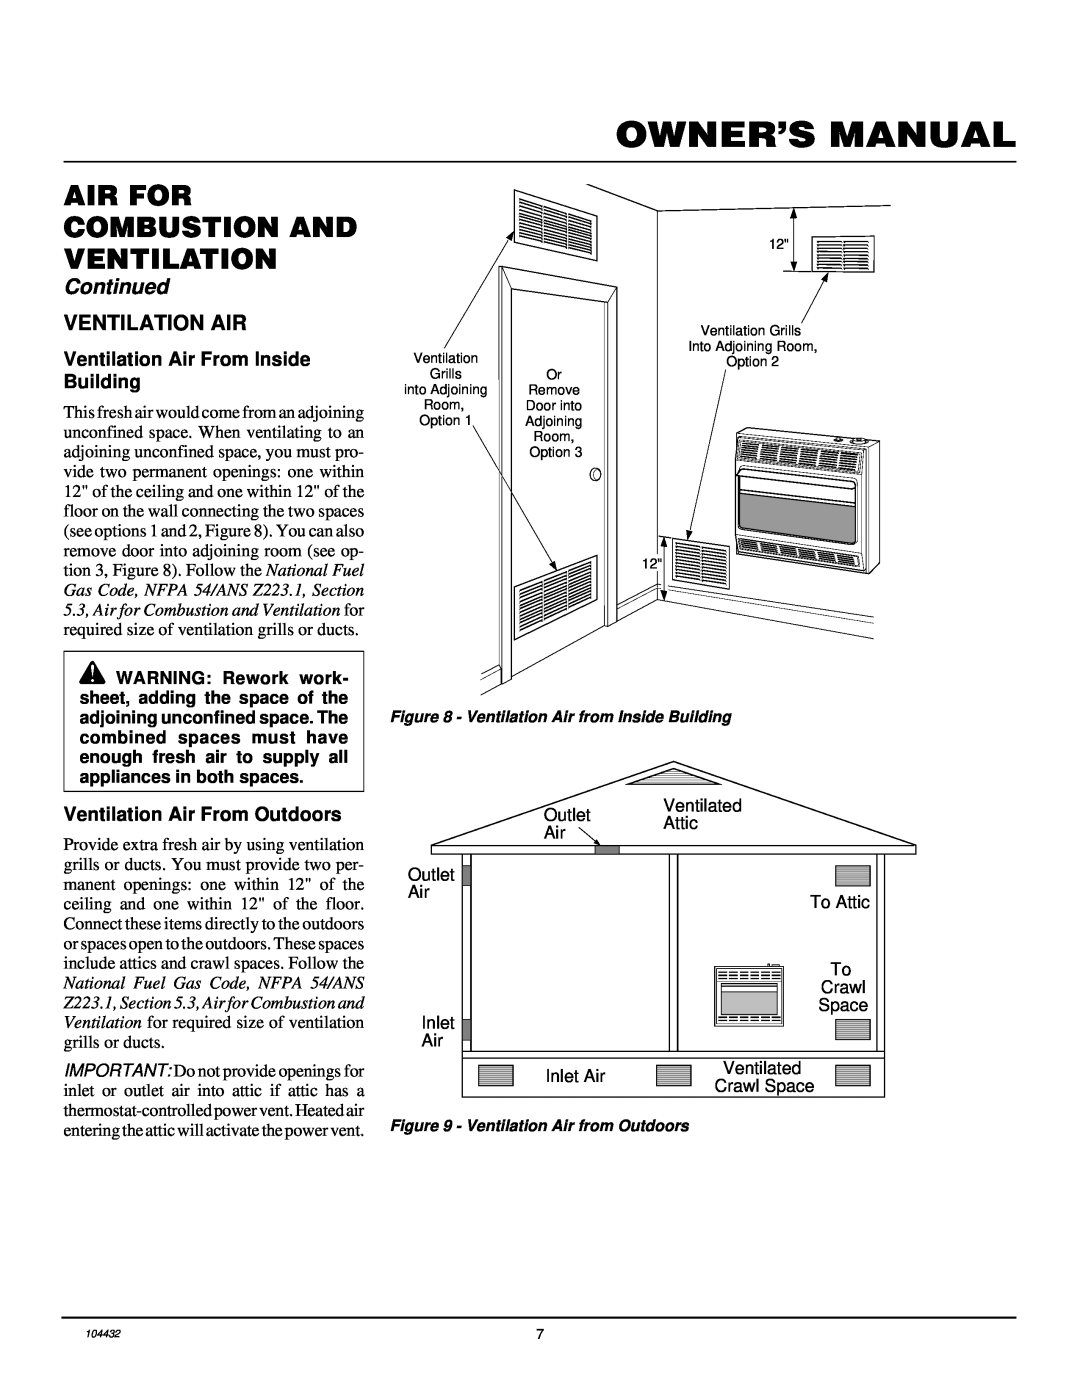 Vanguard Heating VMH3000TP Owner’S Manual, Air For Combustion And Ventilation, Continued, Ventilation Air From Outdoors 